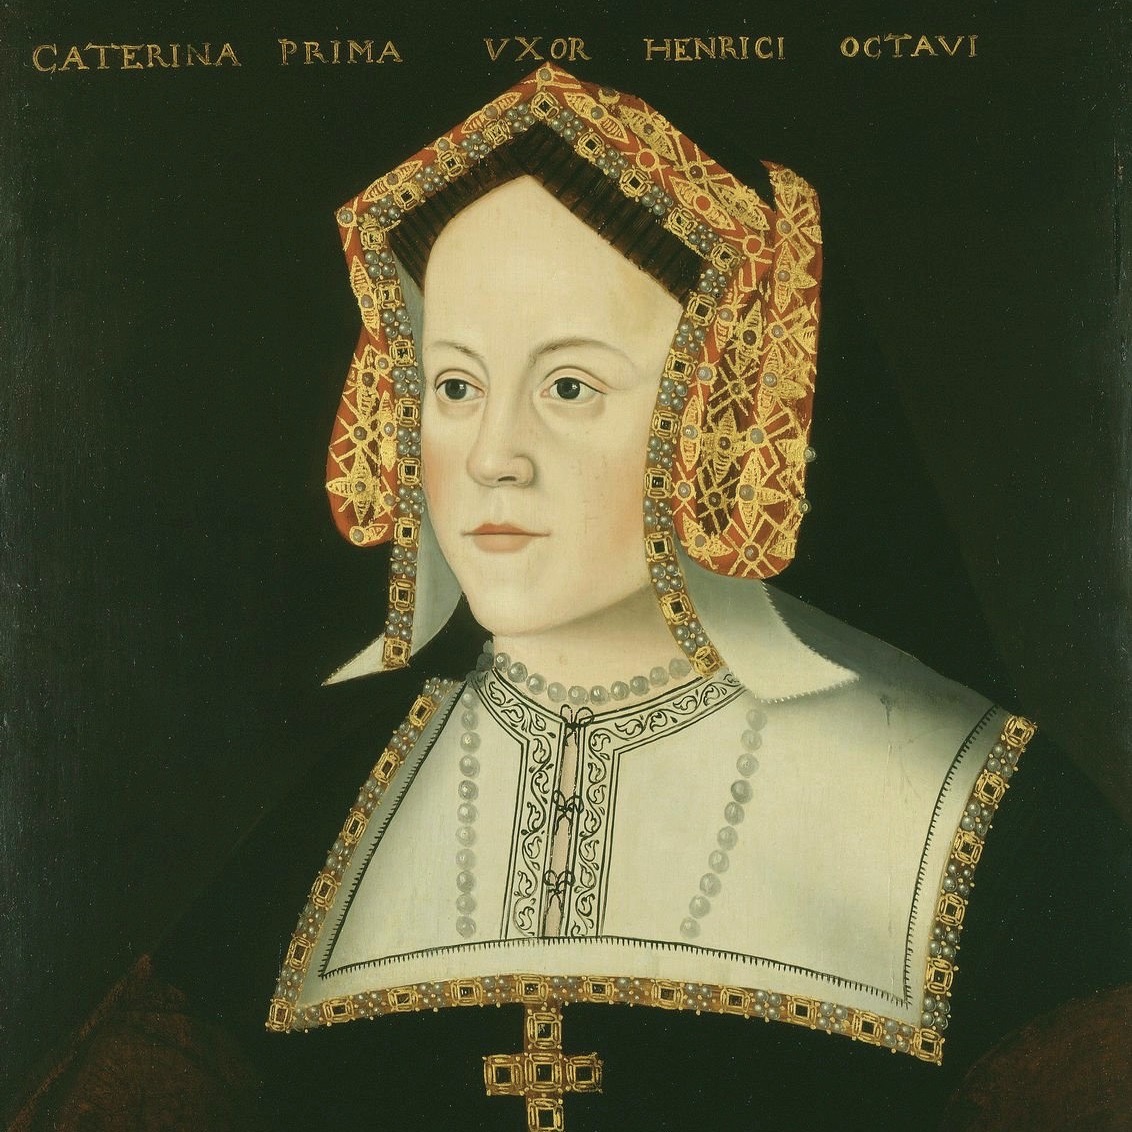 This proved easier said than done. Henry and his wife Catherine tried years for a boy. But after many pregnancies and births, their only surviving child was a girl, Mary. It soon looked unlikely that Catherine would give birth again at all, let alone to the heir. [LP]  @RCT